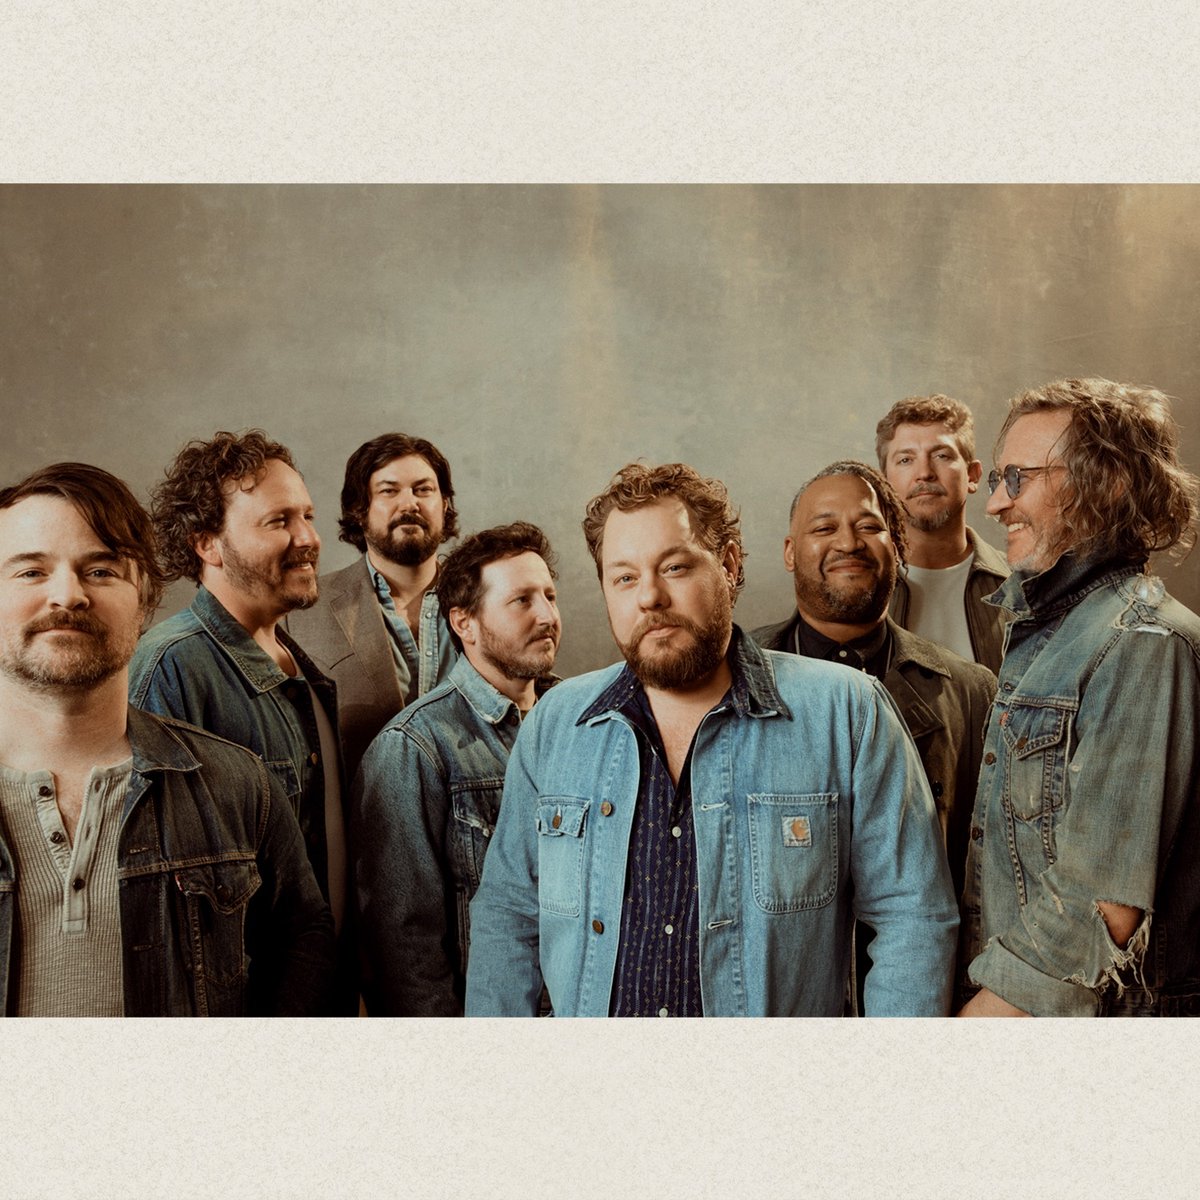 “These recordings were done together in a room with my closest friends. I hope these songs and stories give you an opportunity to better understand your own struggles whatever they may be.” ~ Nathaniel Rateliff @NRateliff & the Night Sweats will release their fourth full-length